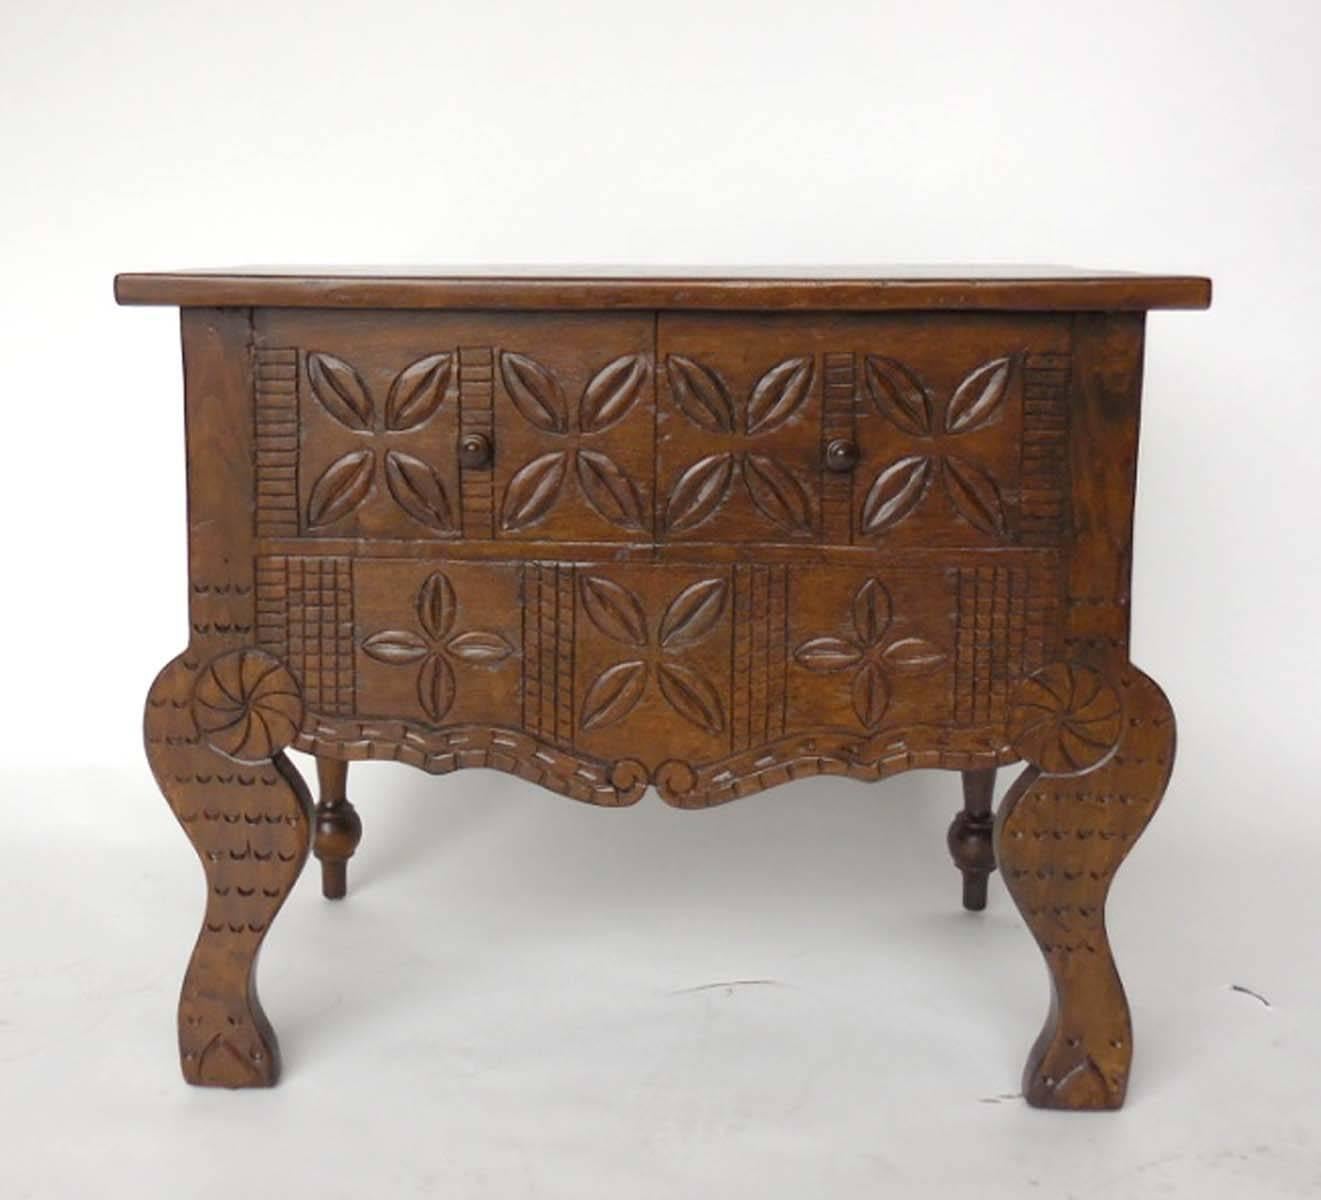 Custom carved console as shown here as a vanity, in walnut #2 in a light distress. Design based on a traditional Guatemalan Nahuala (animal spirit) table.
Can be made custom in any size and finish in walnut. Handmade in Los Angeles by Dos Gallos